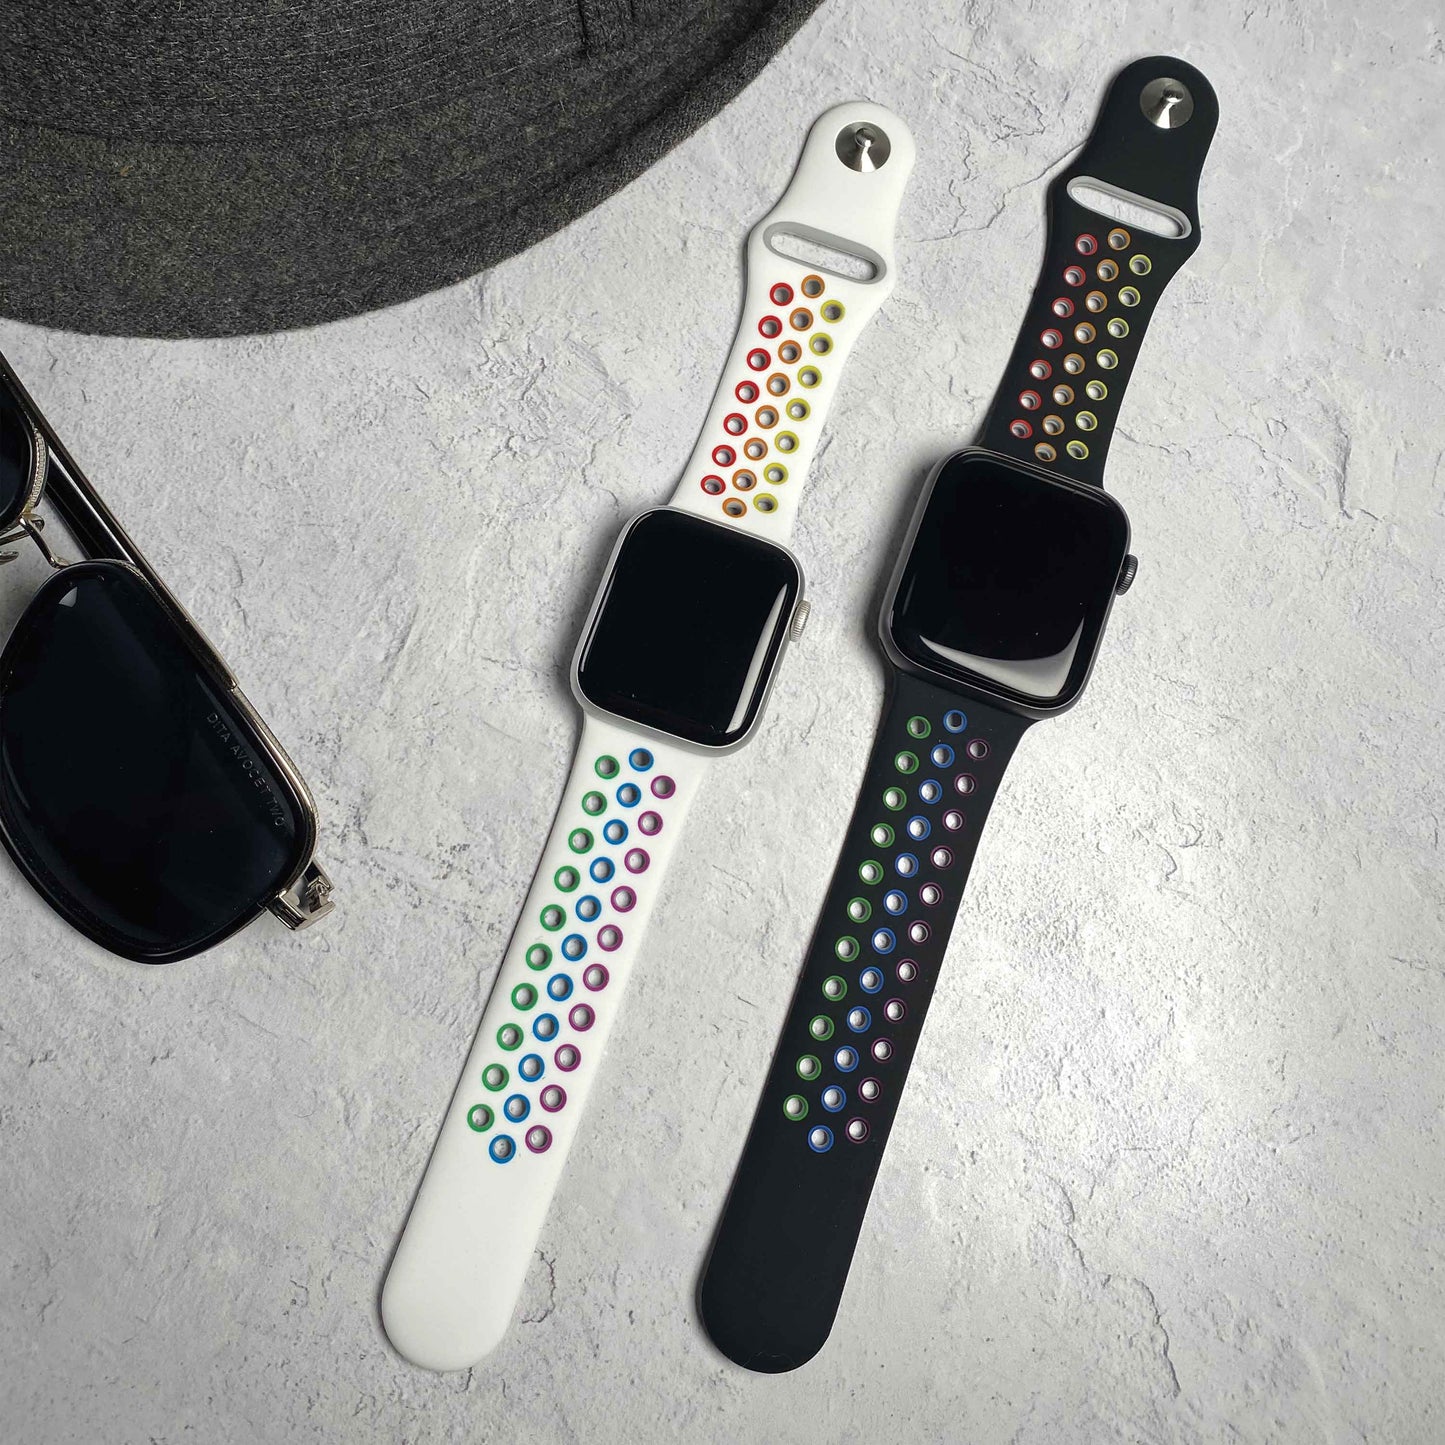 PRIDE Breathable sport silicone watchband